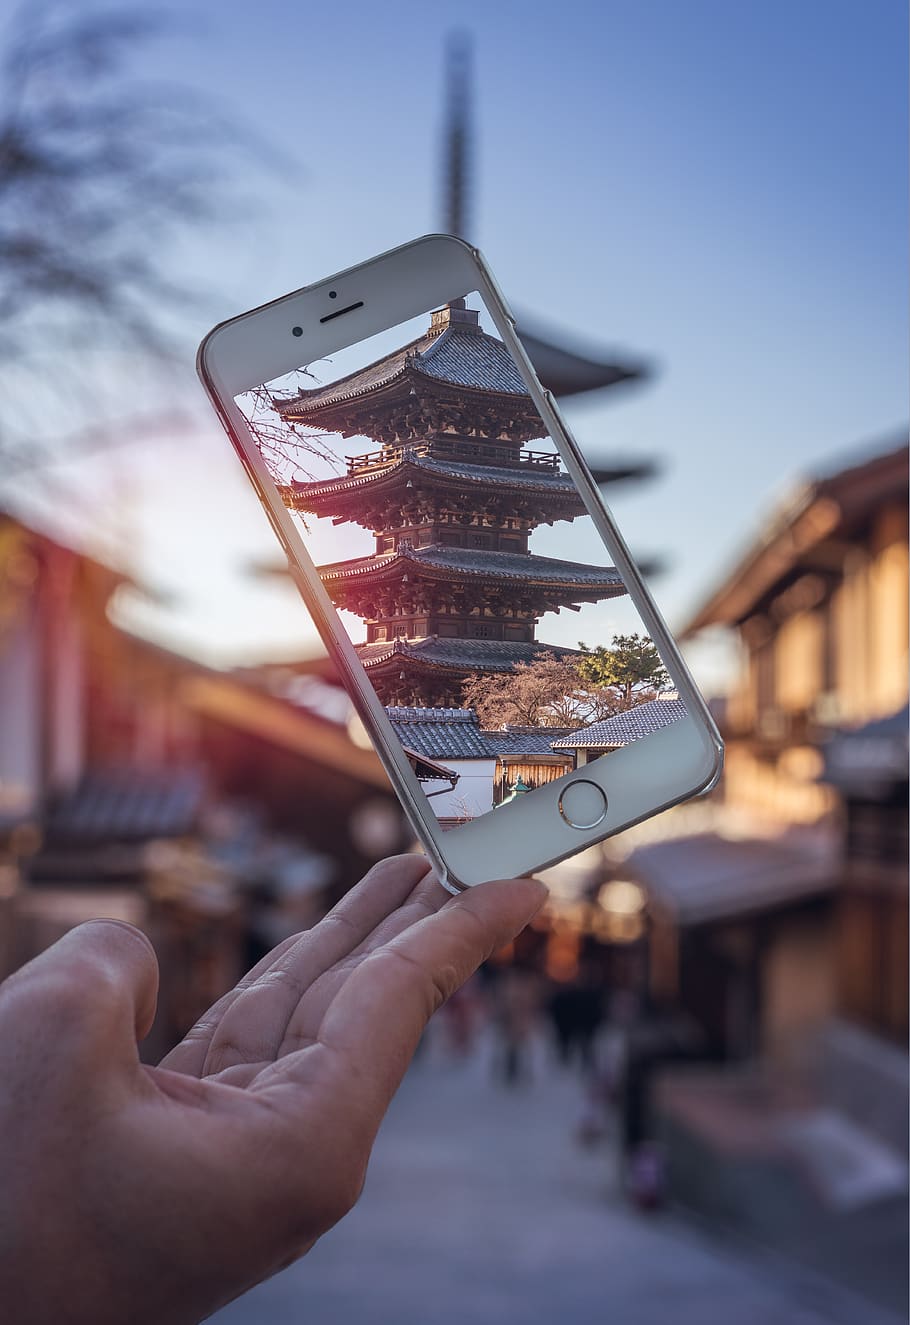 HD wallpaper: phone, iphone, temple, japan, tokyo, sunset, travel, picture  | Wallpaper Flare